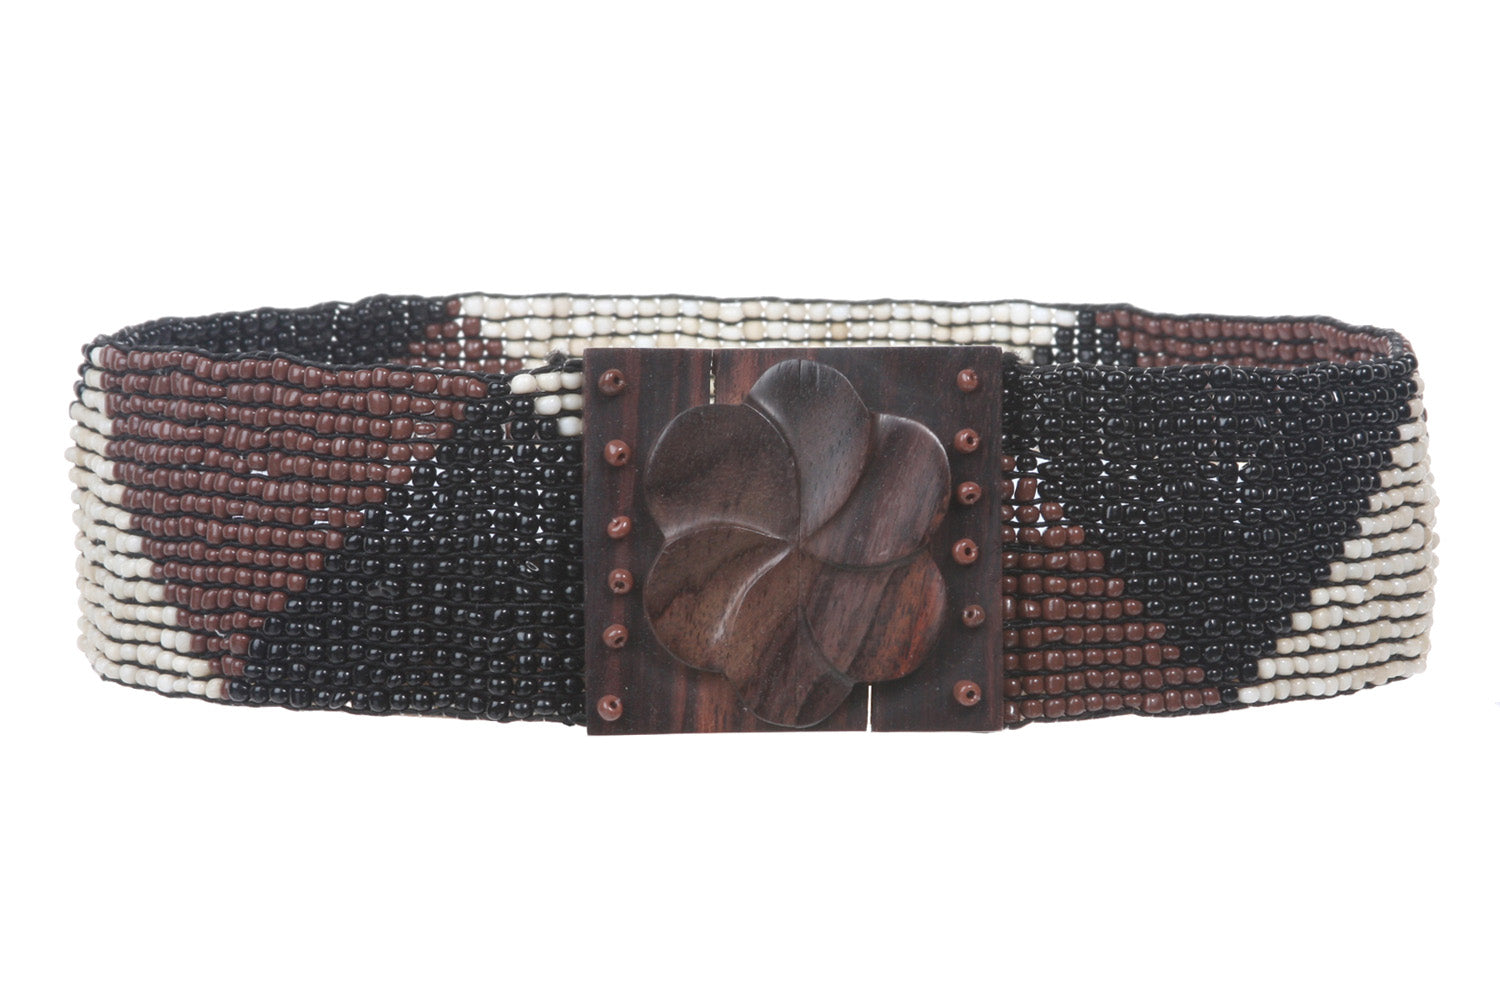 2 1/4" Beaded Stretch Belt With Wood Buckle Closure